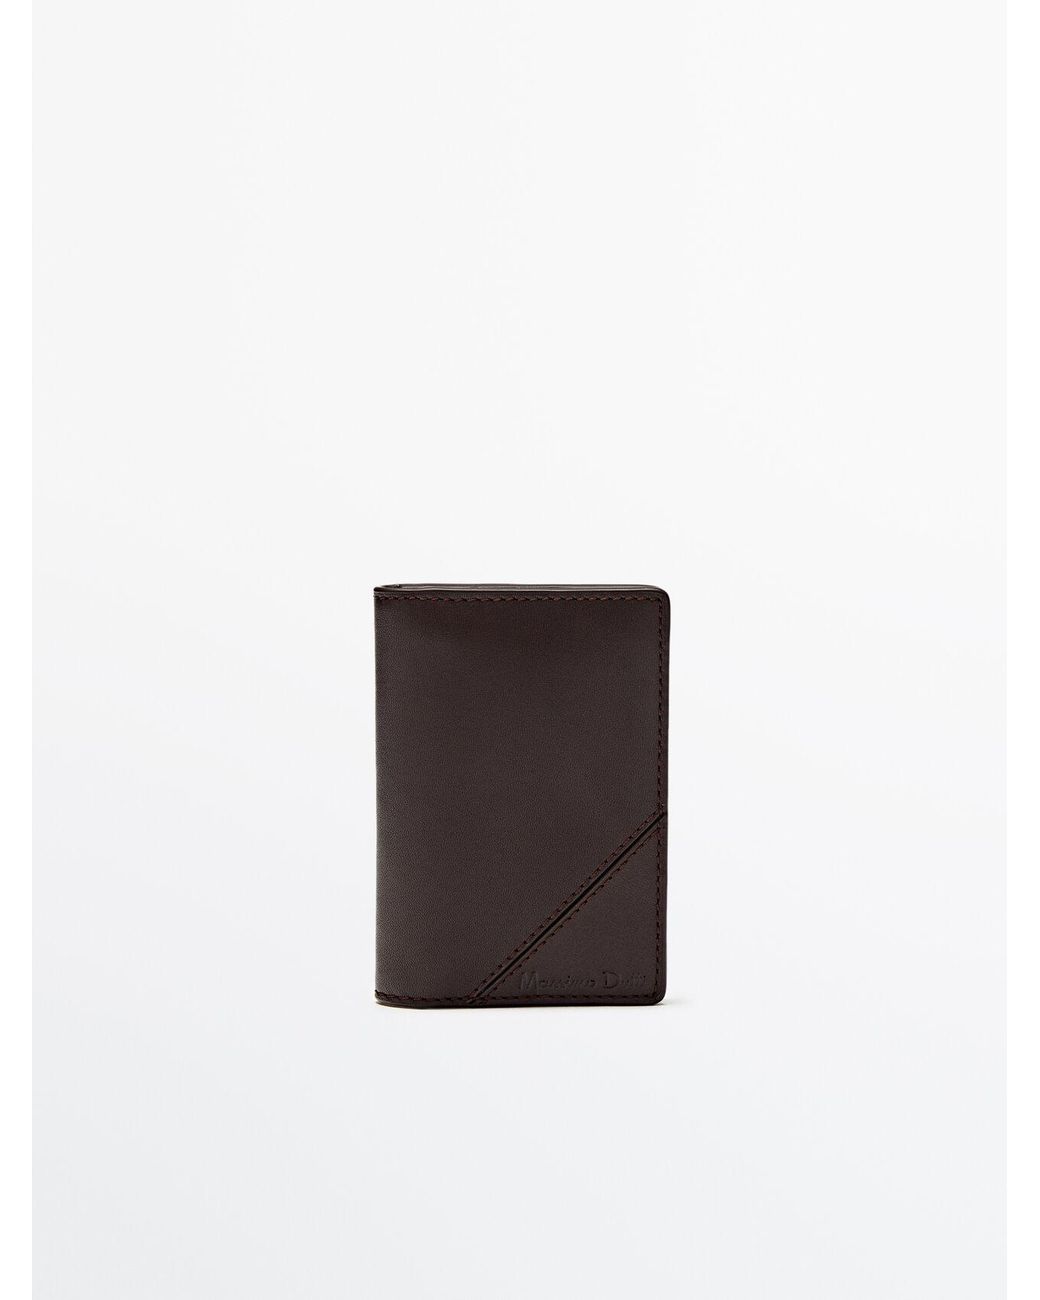 Respect familie Geestig MASSIMO DUTTI Vertical Leather Wallet in Brown for Men | Lyst